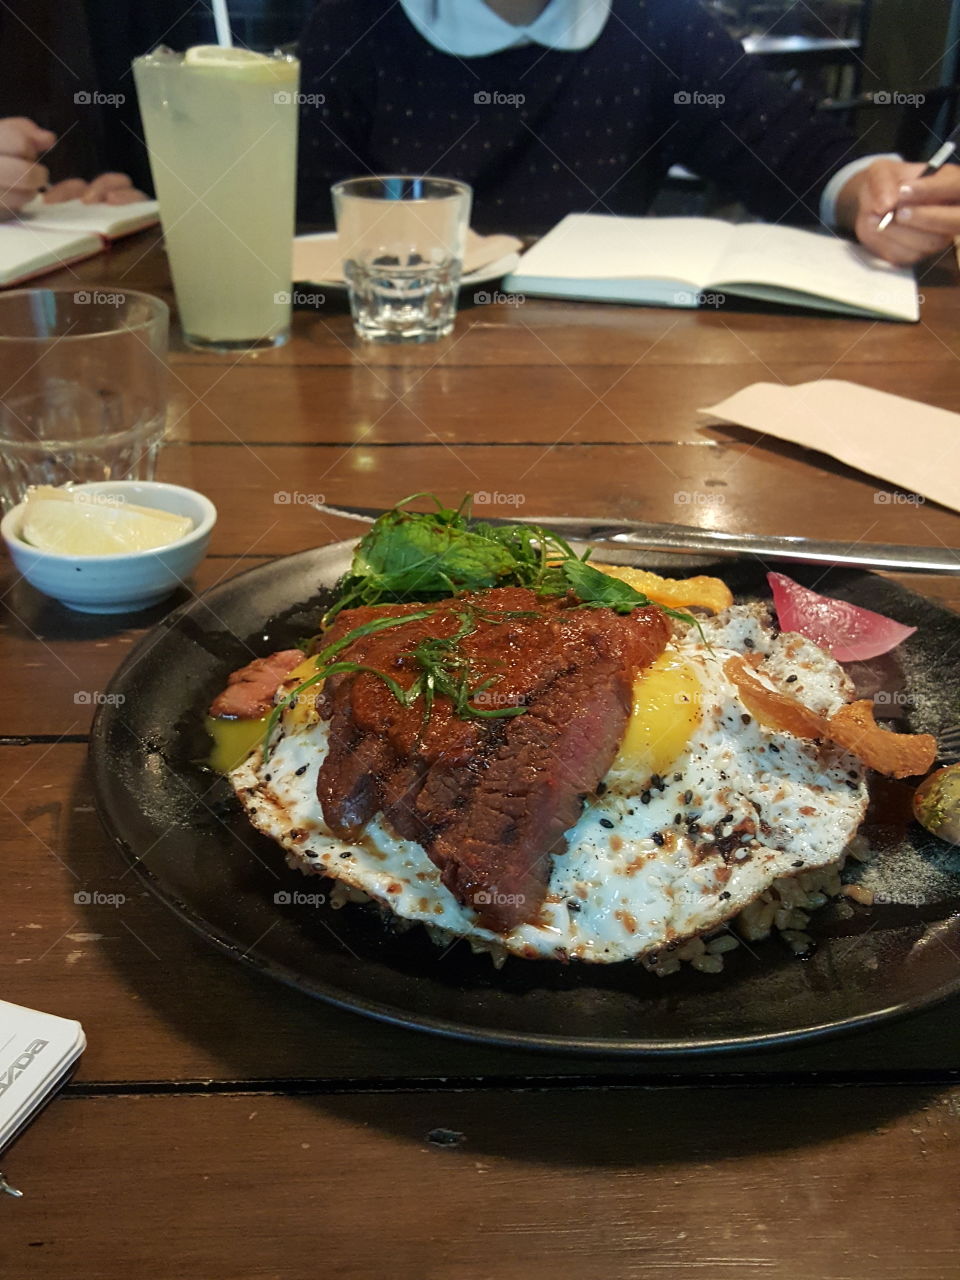 don't miss this scrumptious steak fried rice here at "your local" located in makati.  a korean spiced sher wagyu, sunny side up eggs, fresh herbs on shitake fried rice😋 And now, im drooling seriously!